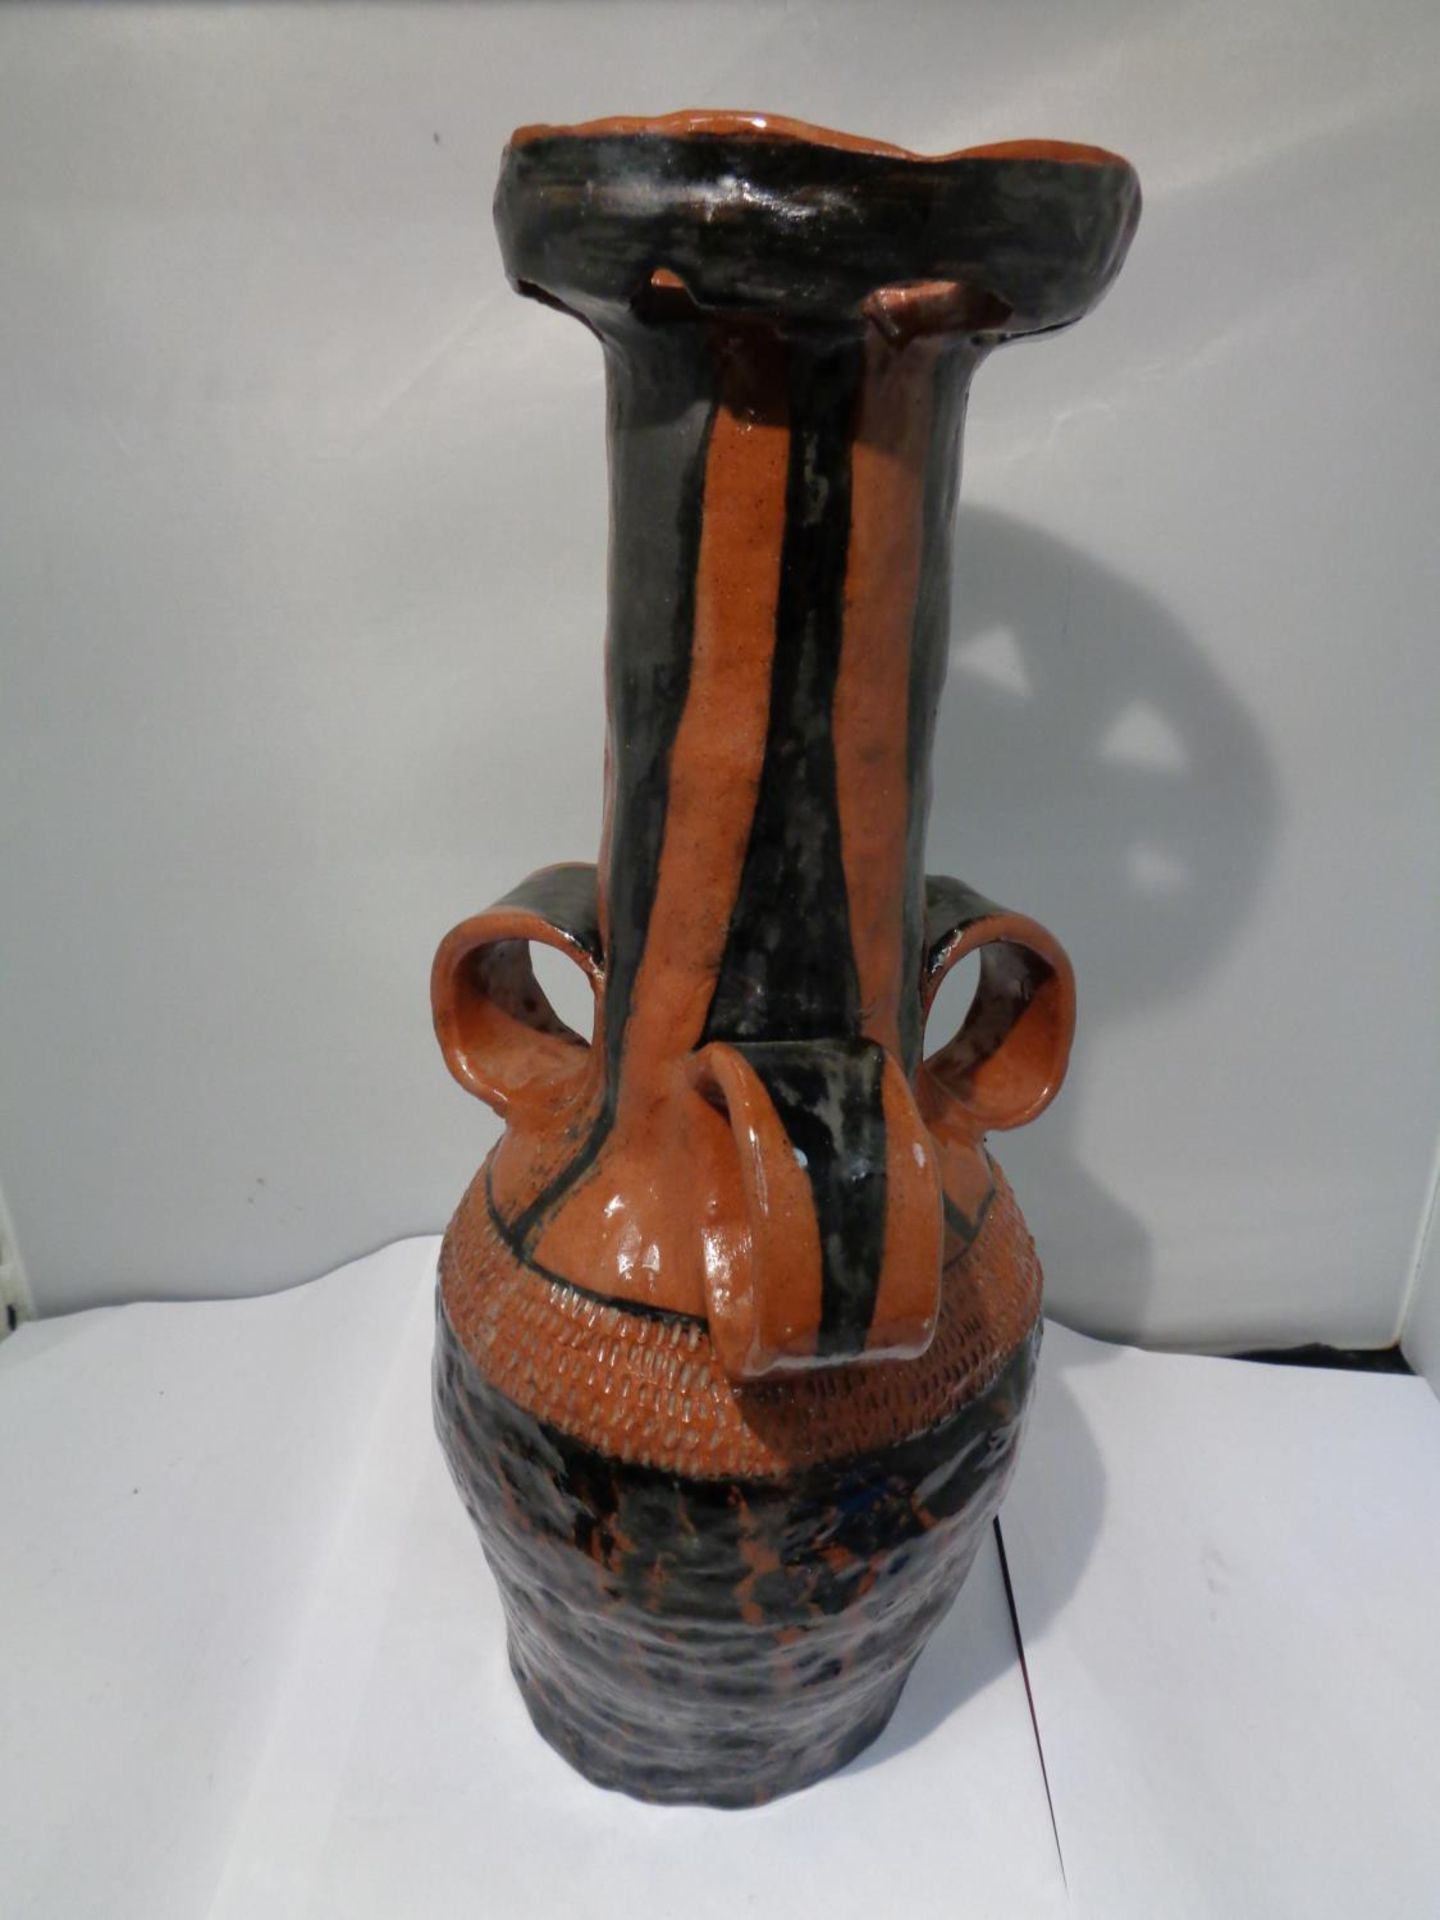 A LARGE MIDDLE EASTERN, POSSIBLY TURKISH, POTTERY TRI HANDLDED WINE VESSEL, HEIGHT 39 CM - Image 2 of 2